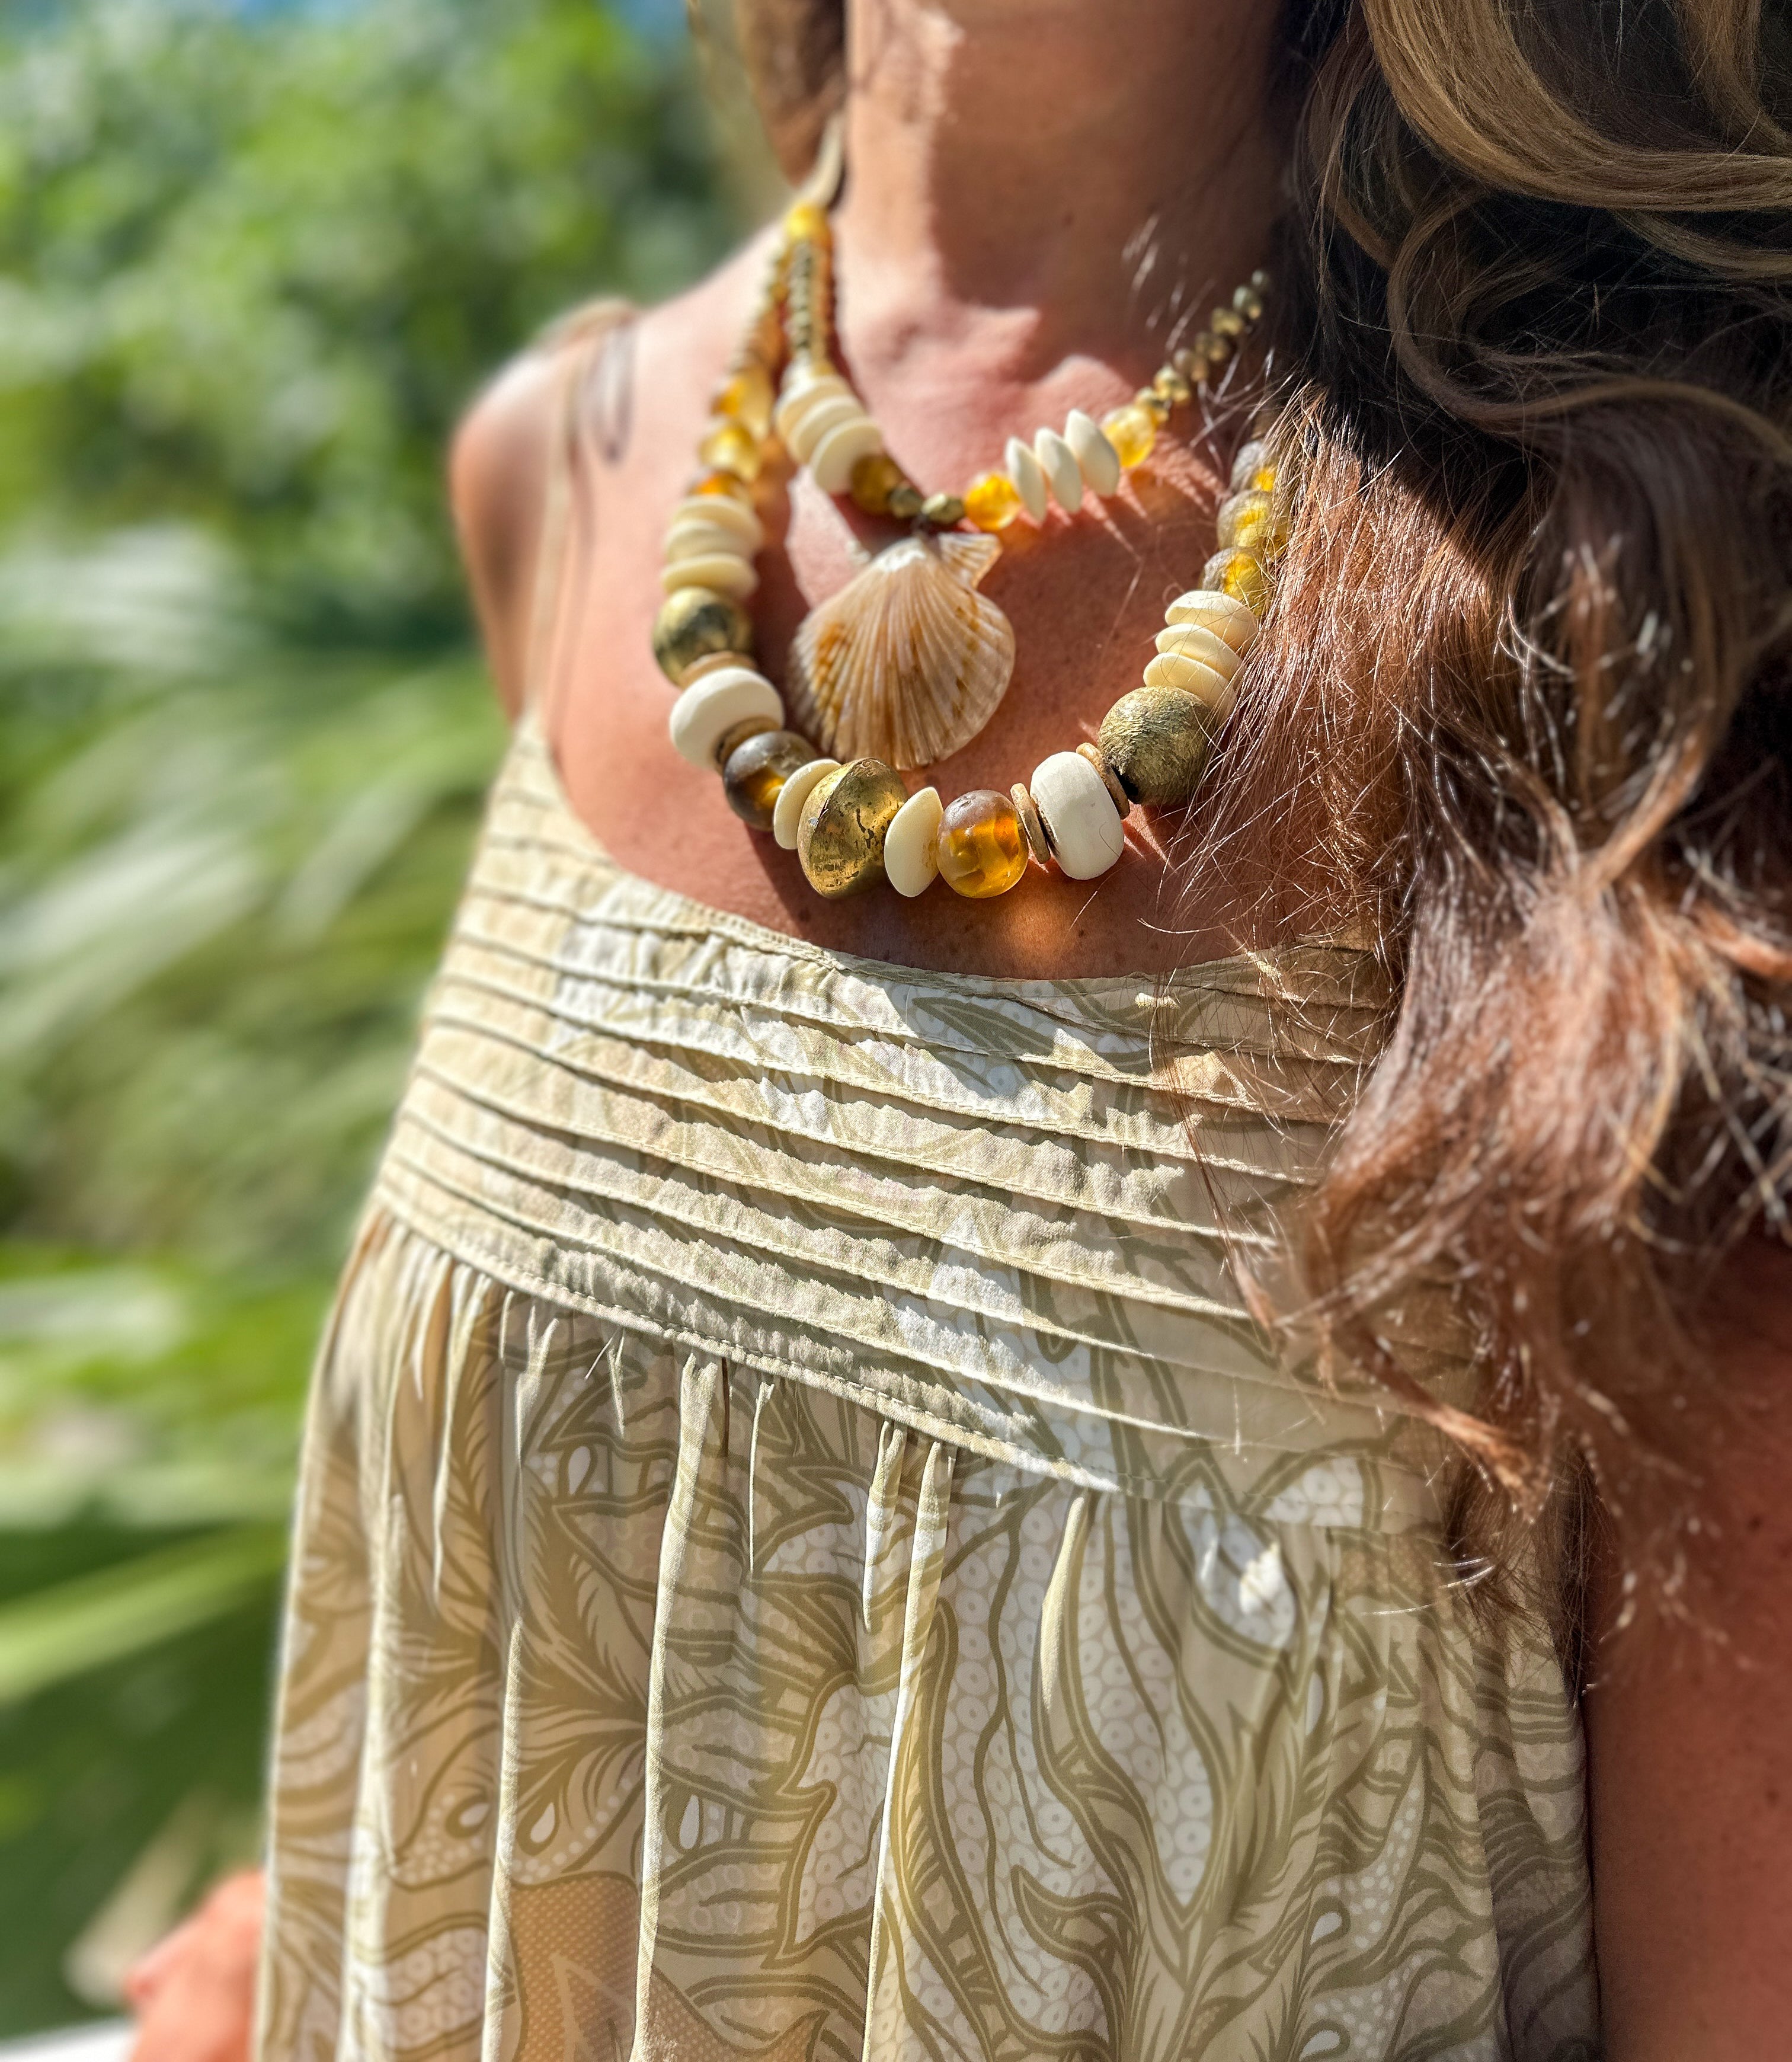 Layered Shell Necklace | Summer Glow